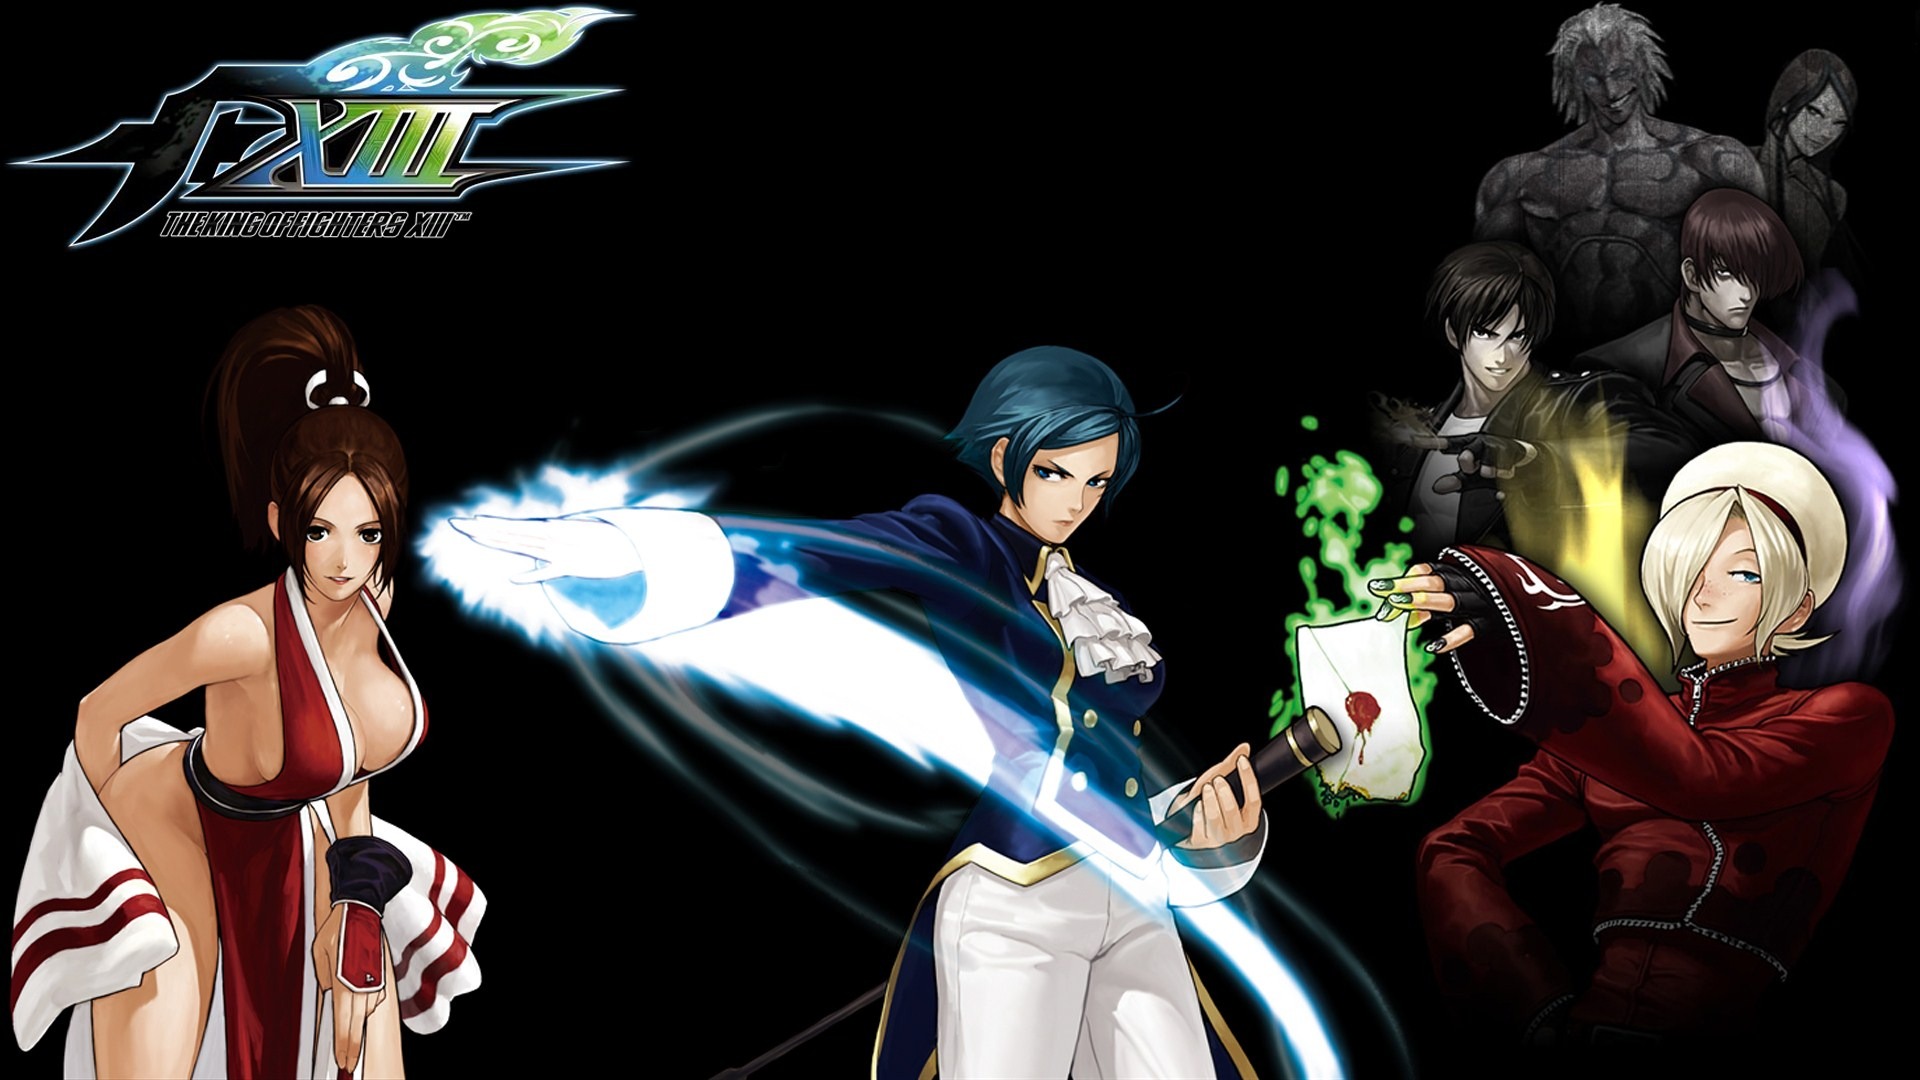 The King of Fighters XIII wallpapers #7 - 1920x1080